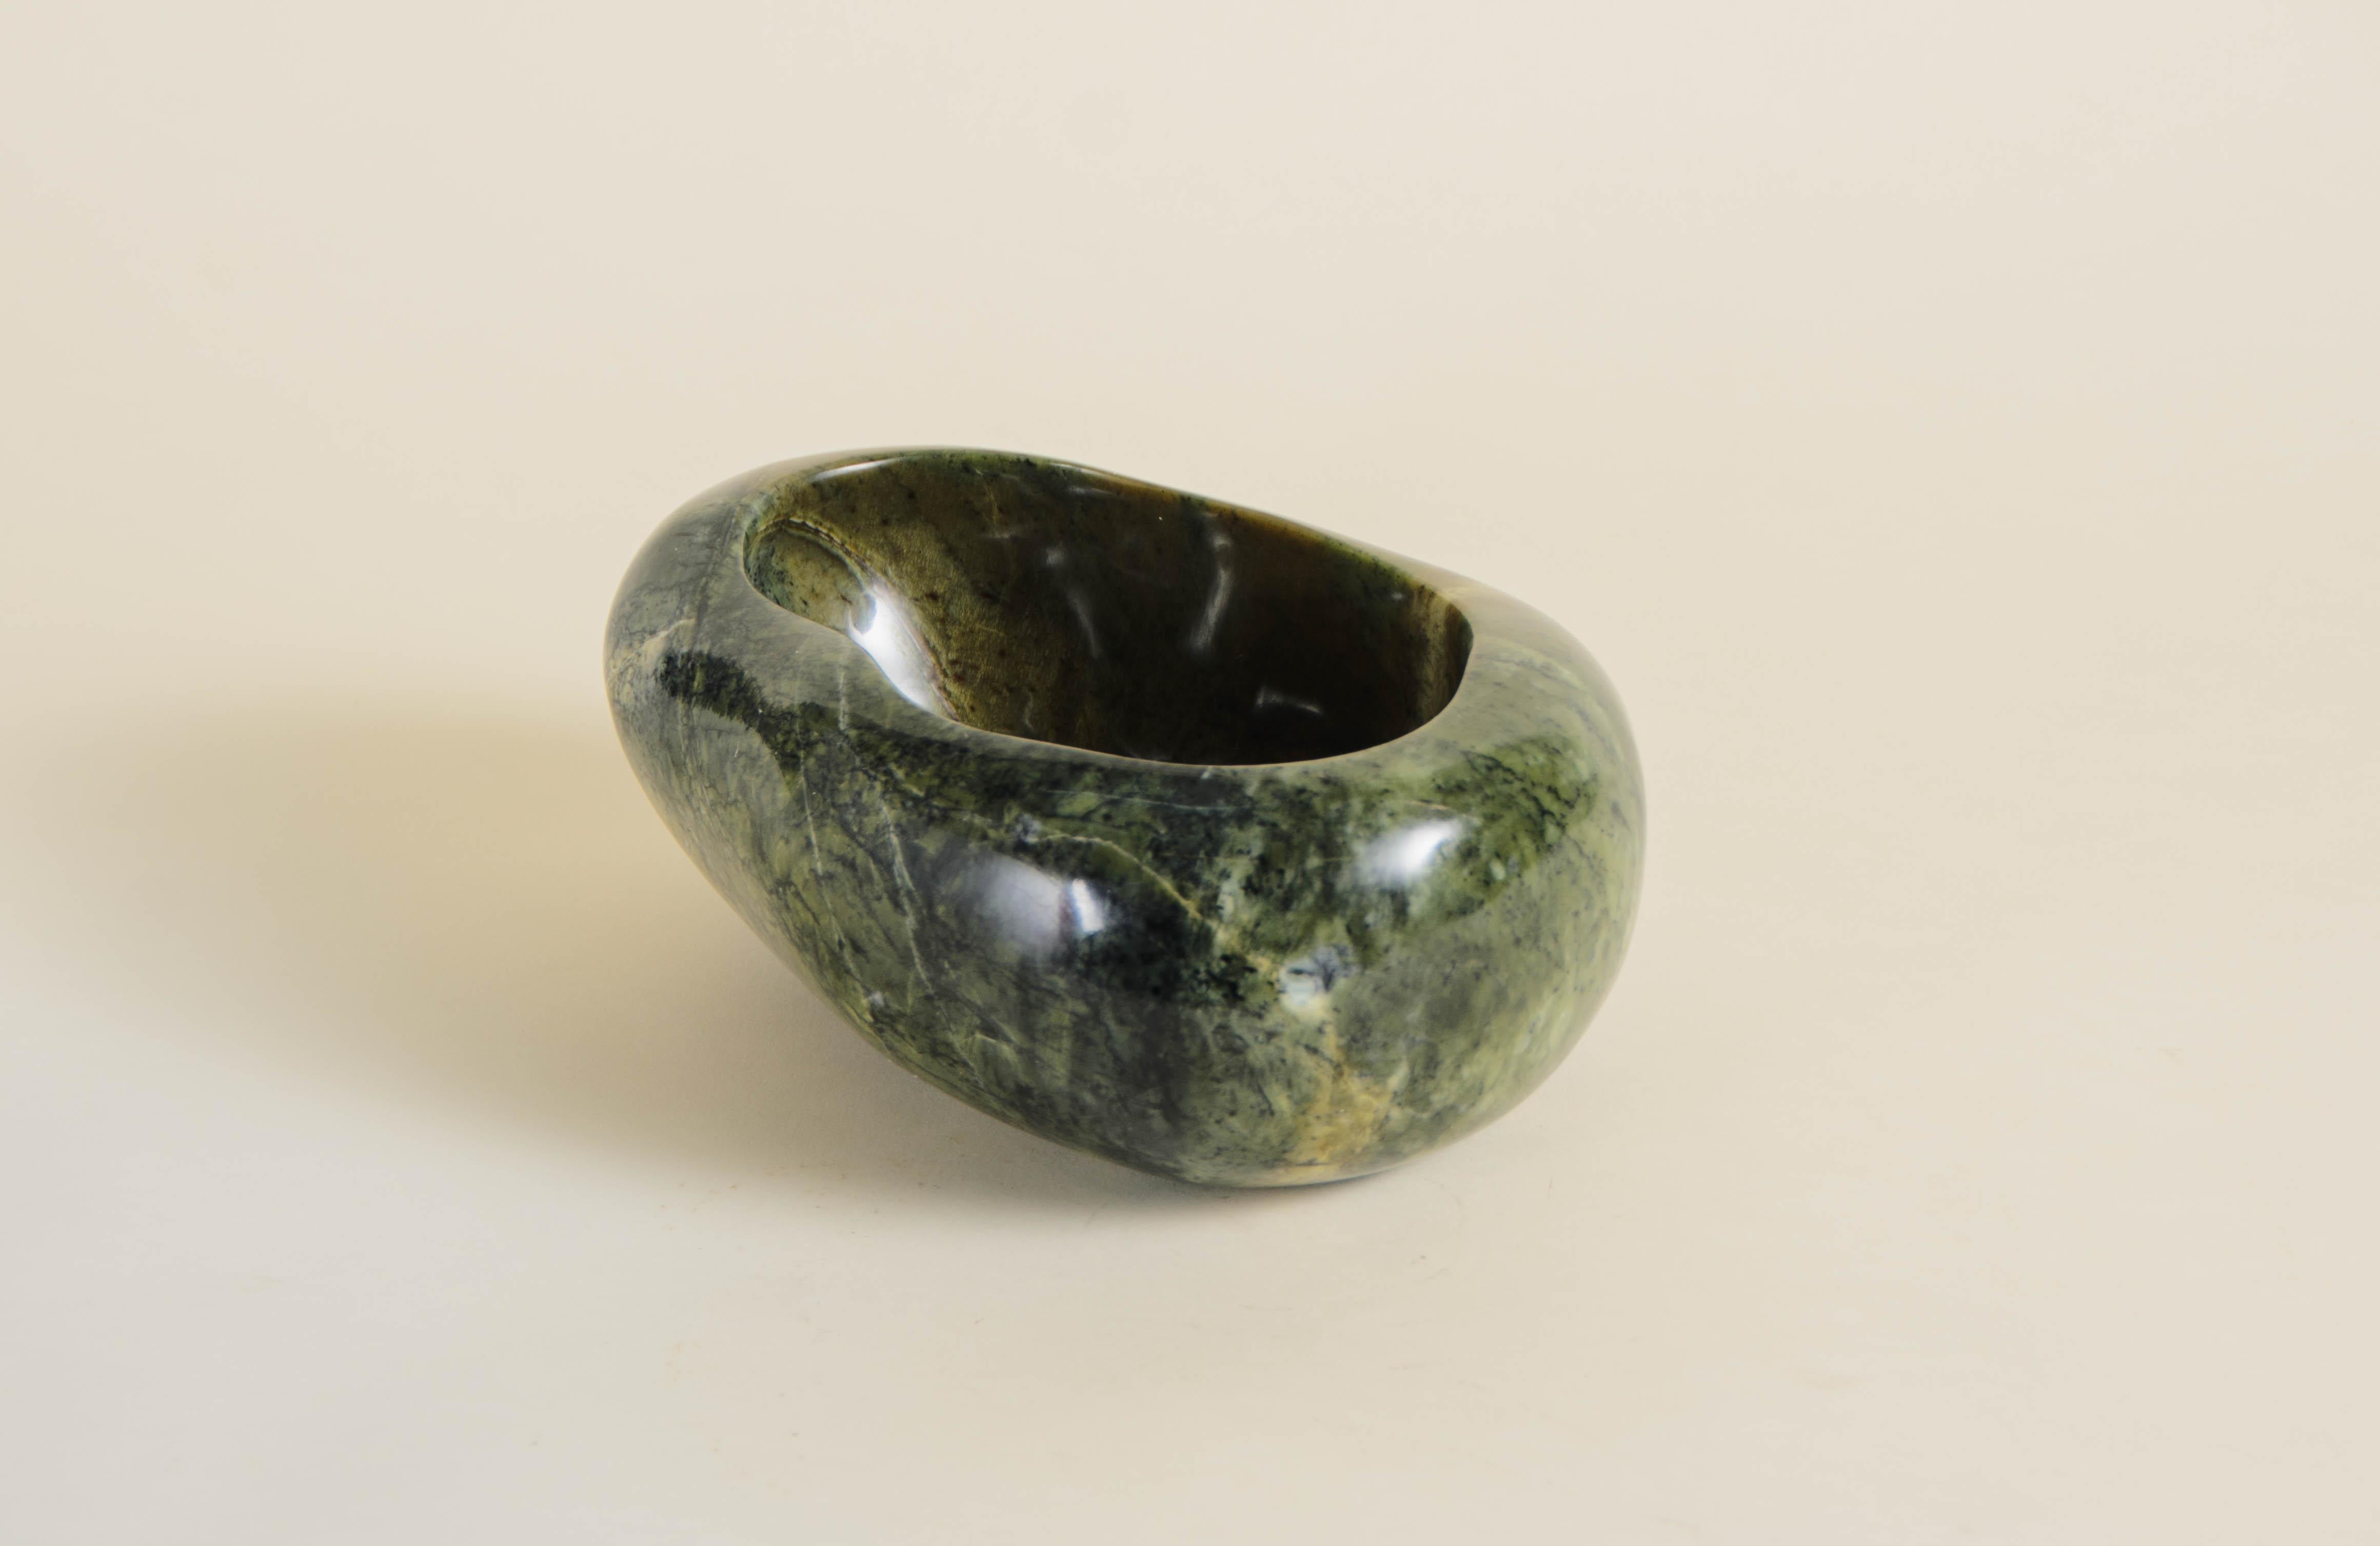 Pebble Pot (Small)
Nephrite Jade
Hand Carved
Limited Edition
Contemporary
Jade Labeled: Pebble S01.

Known as the “Stone of Heaven,” Nephrite Jade is prized for both its aesthetic beauty and symbolic value, with the ancient Chinese believing